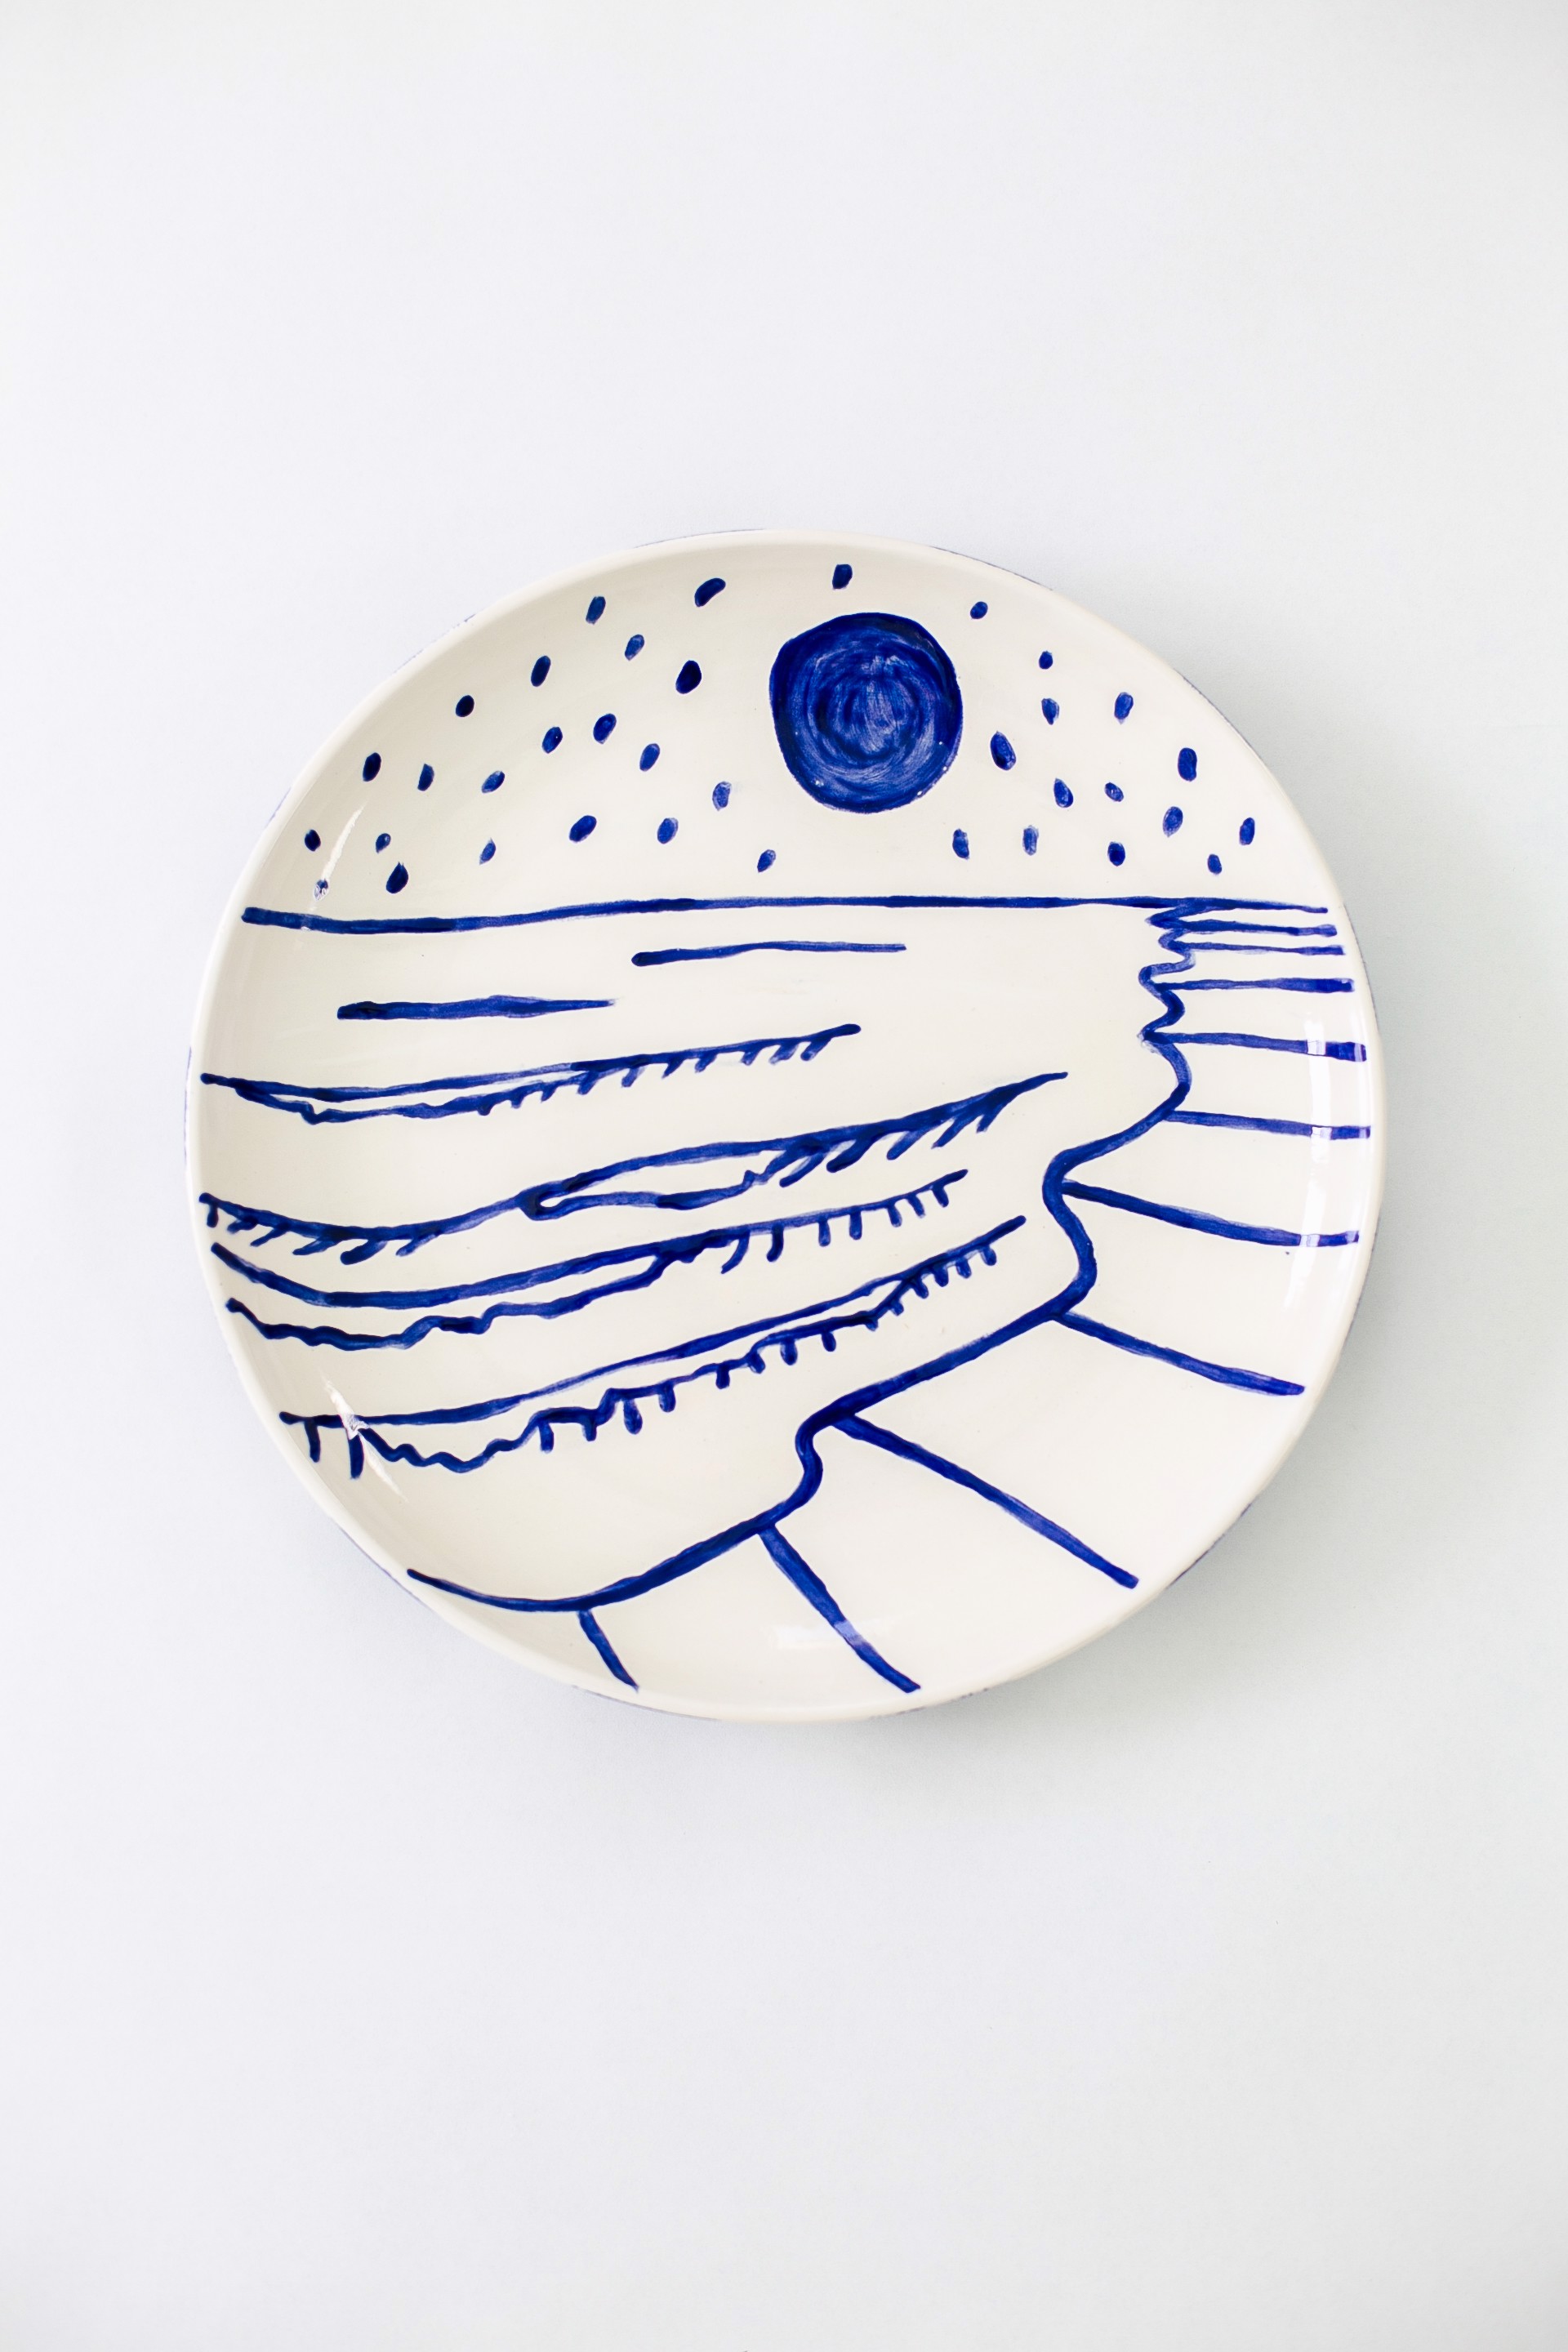 Dinner Plate 5 by Andrea Naylor